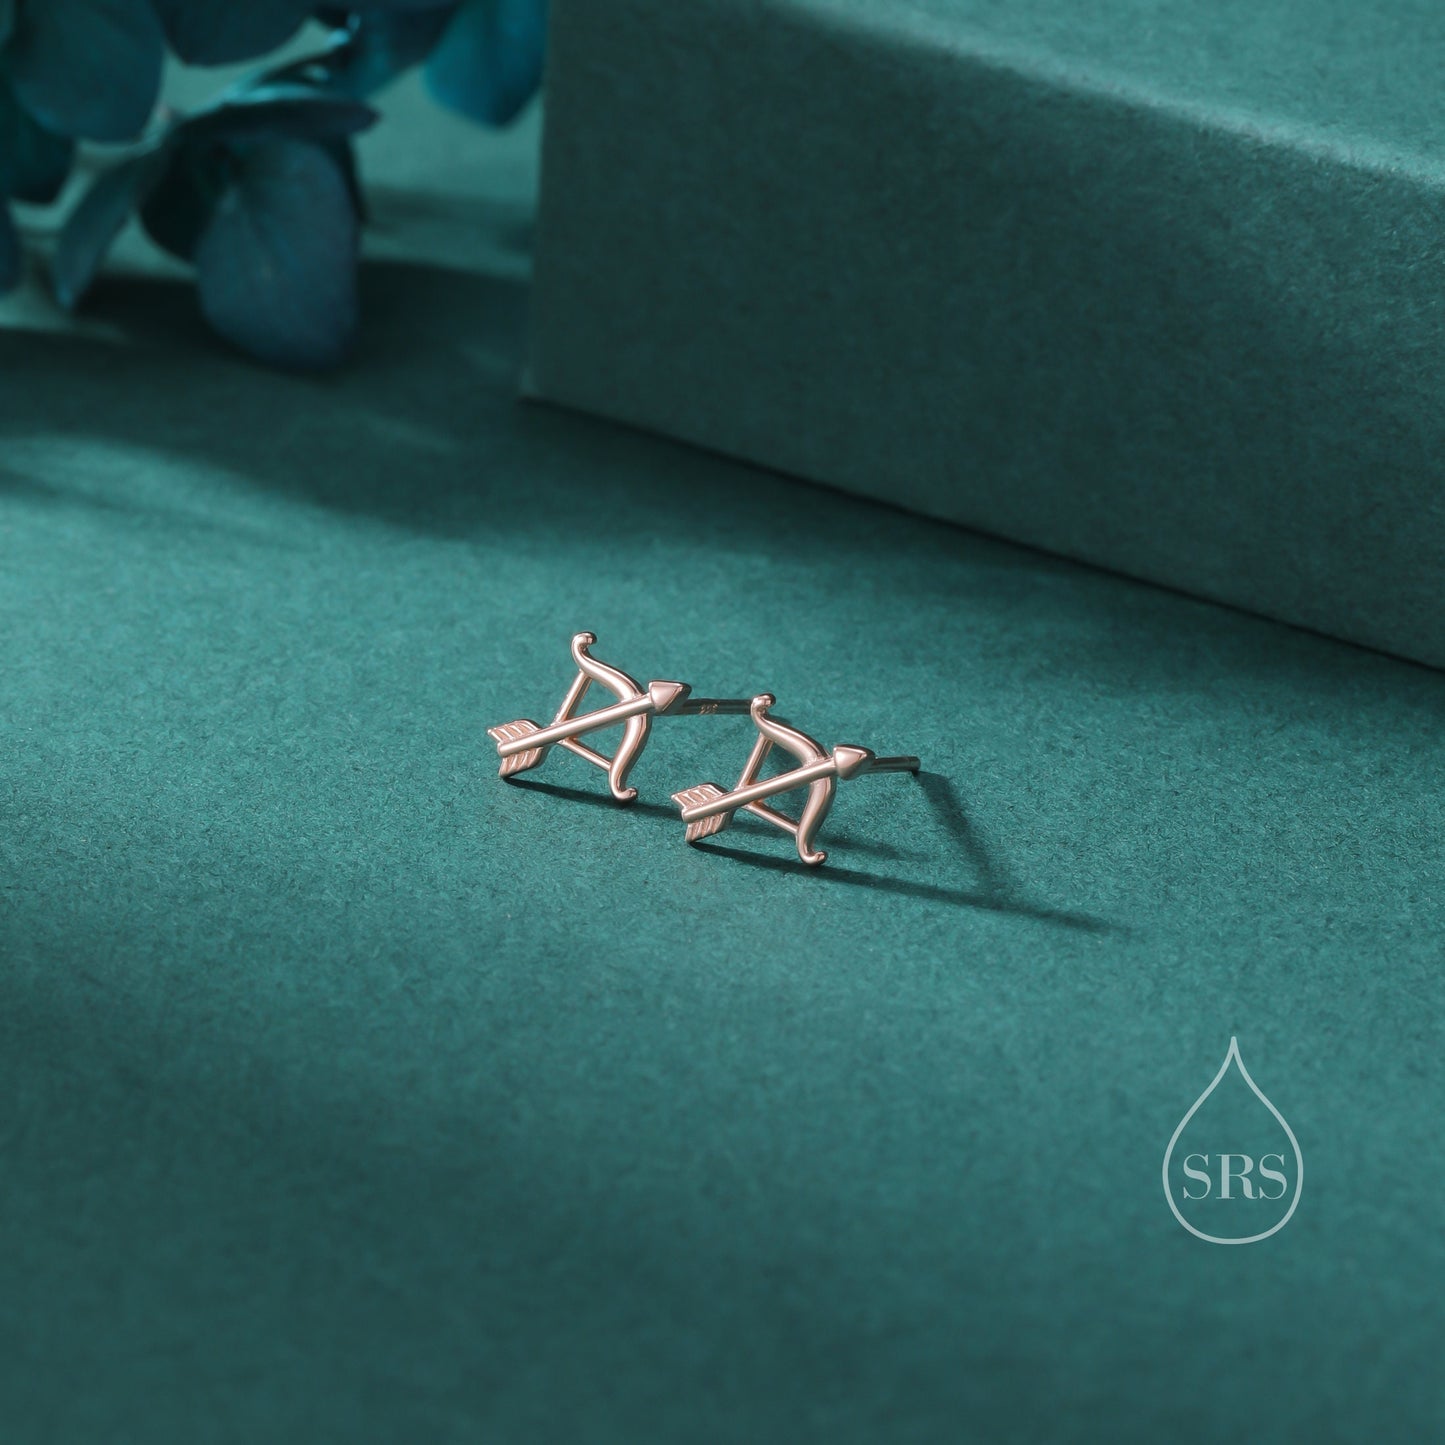 Bow and Arrow Stud Earrings in Sterling Silver, Silver or Gold or Rose Gold, Bow and Arrow Earrings